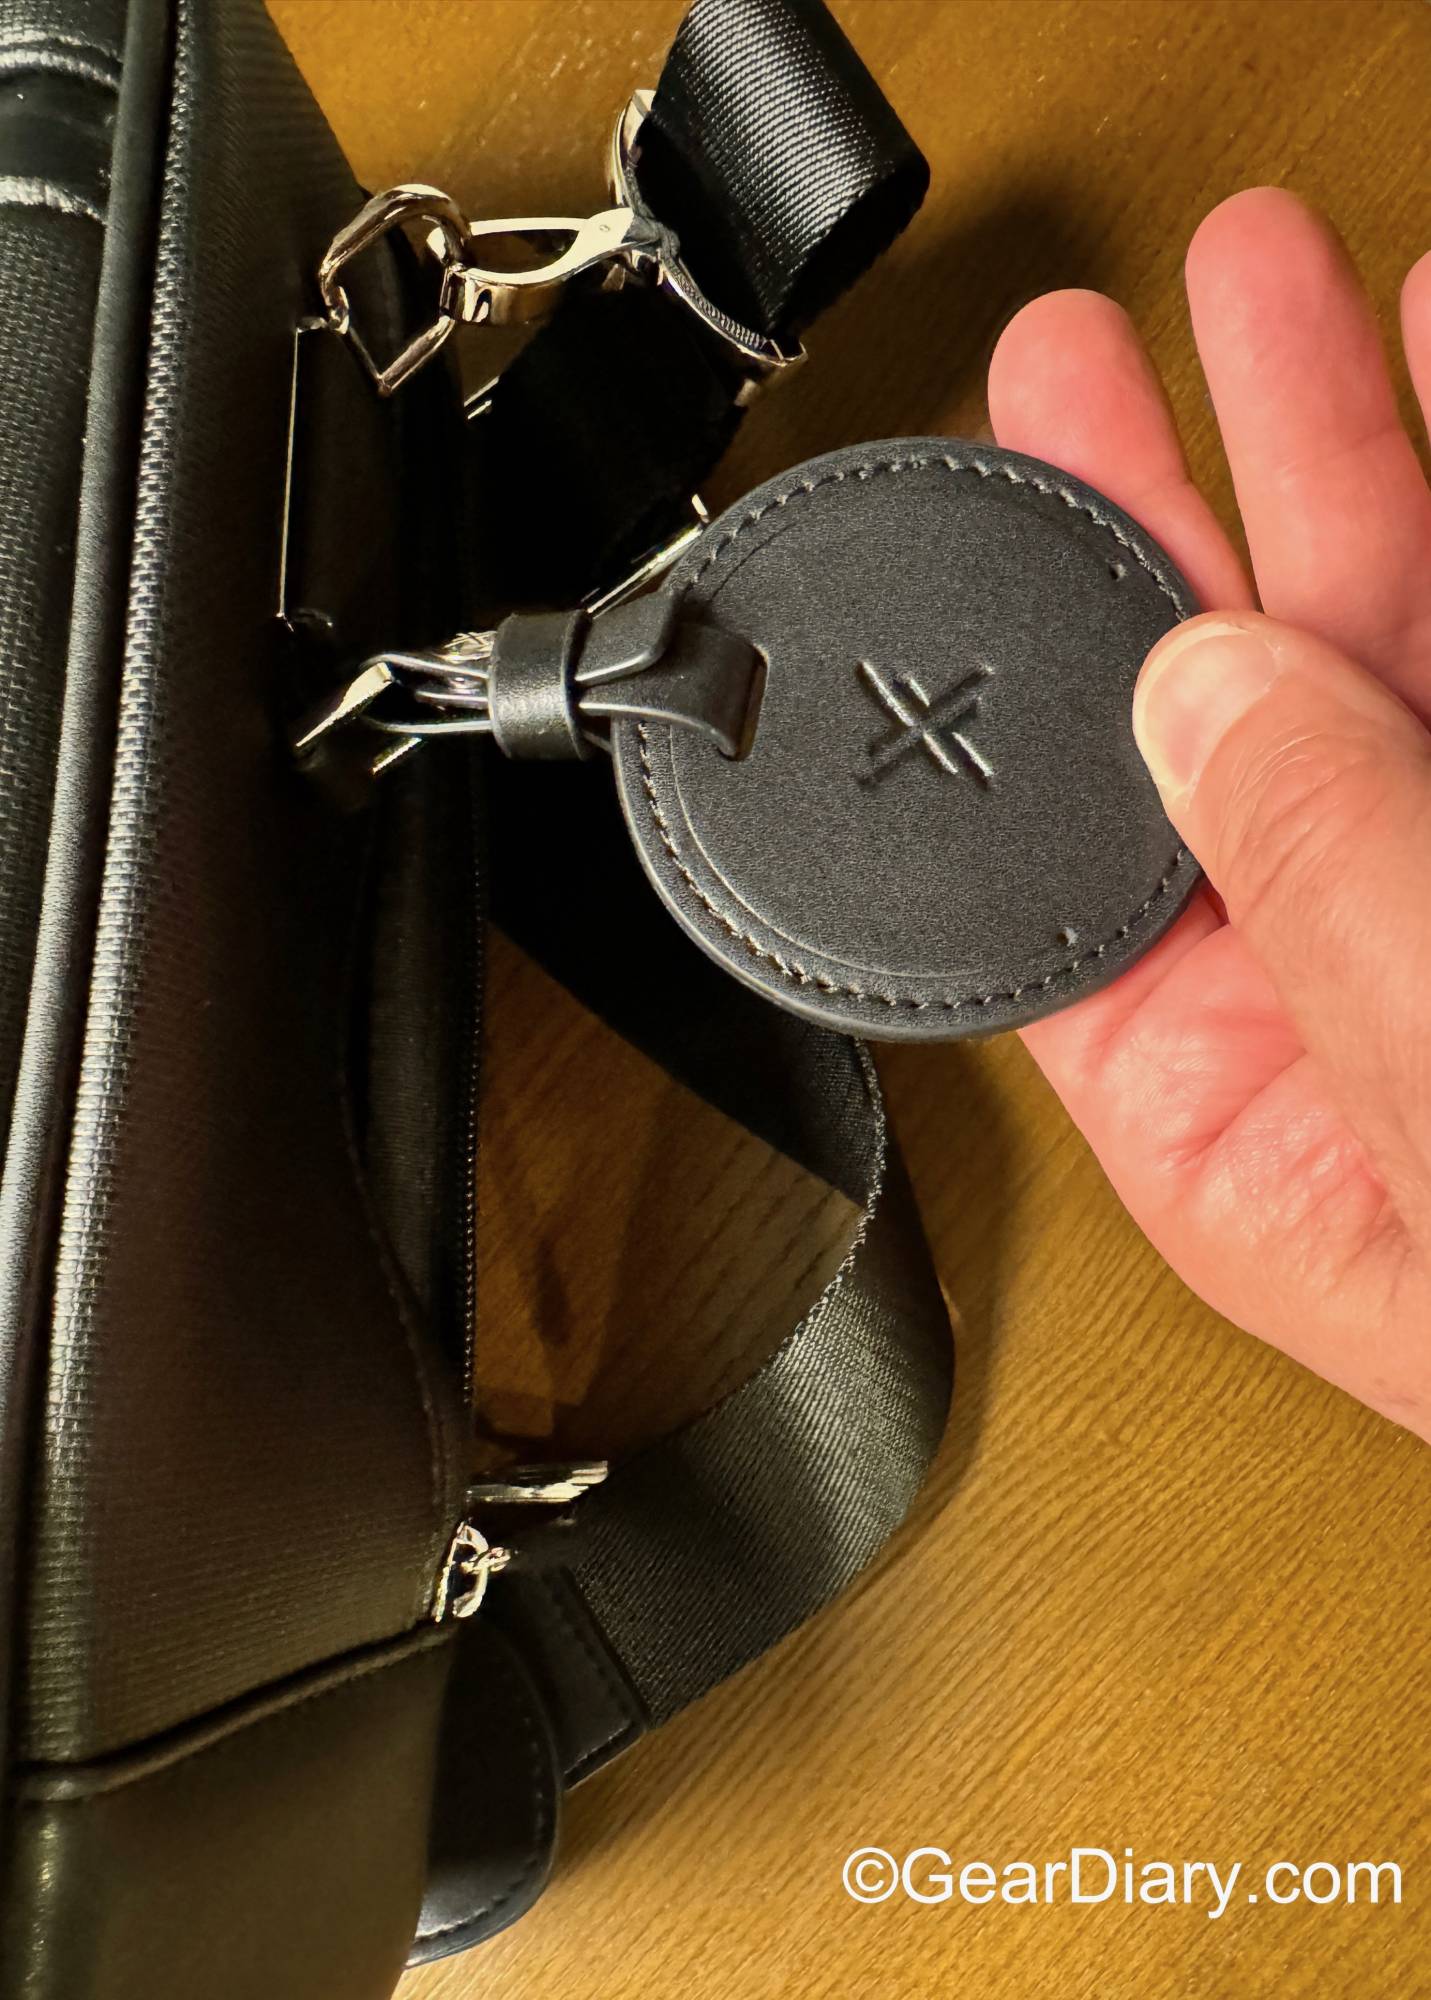 xBriefcase has an attached tag meant to hold an AirTag